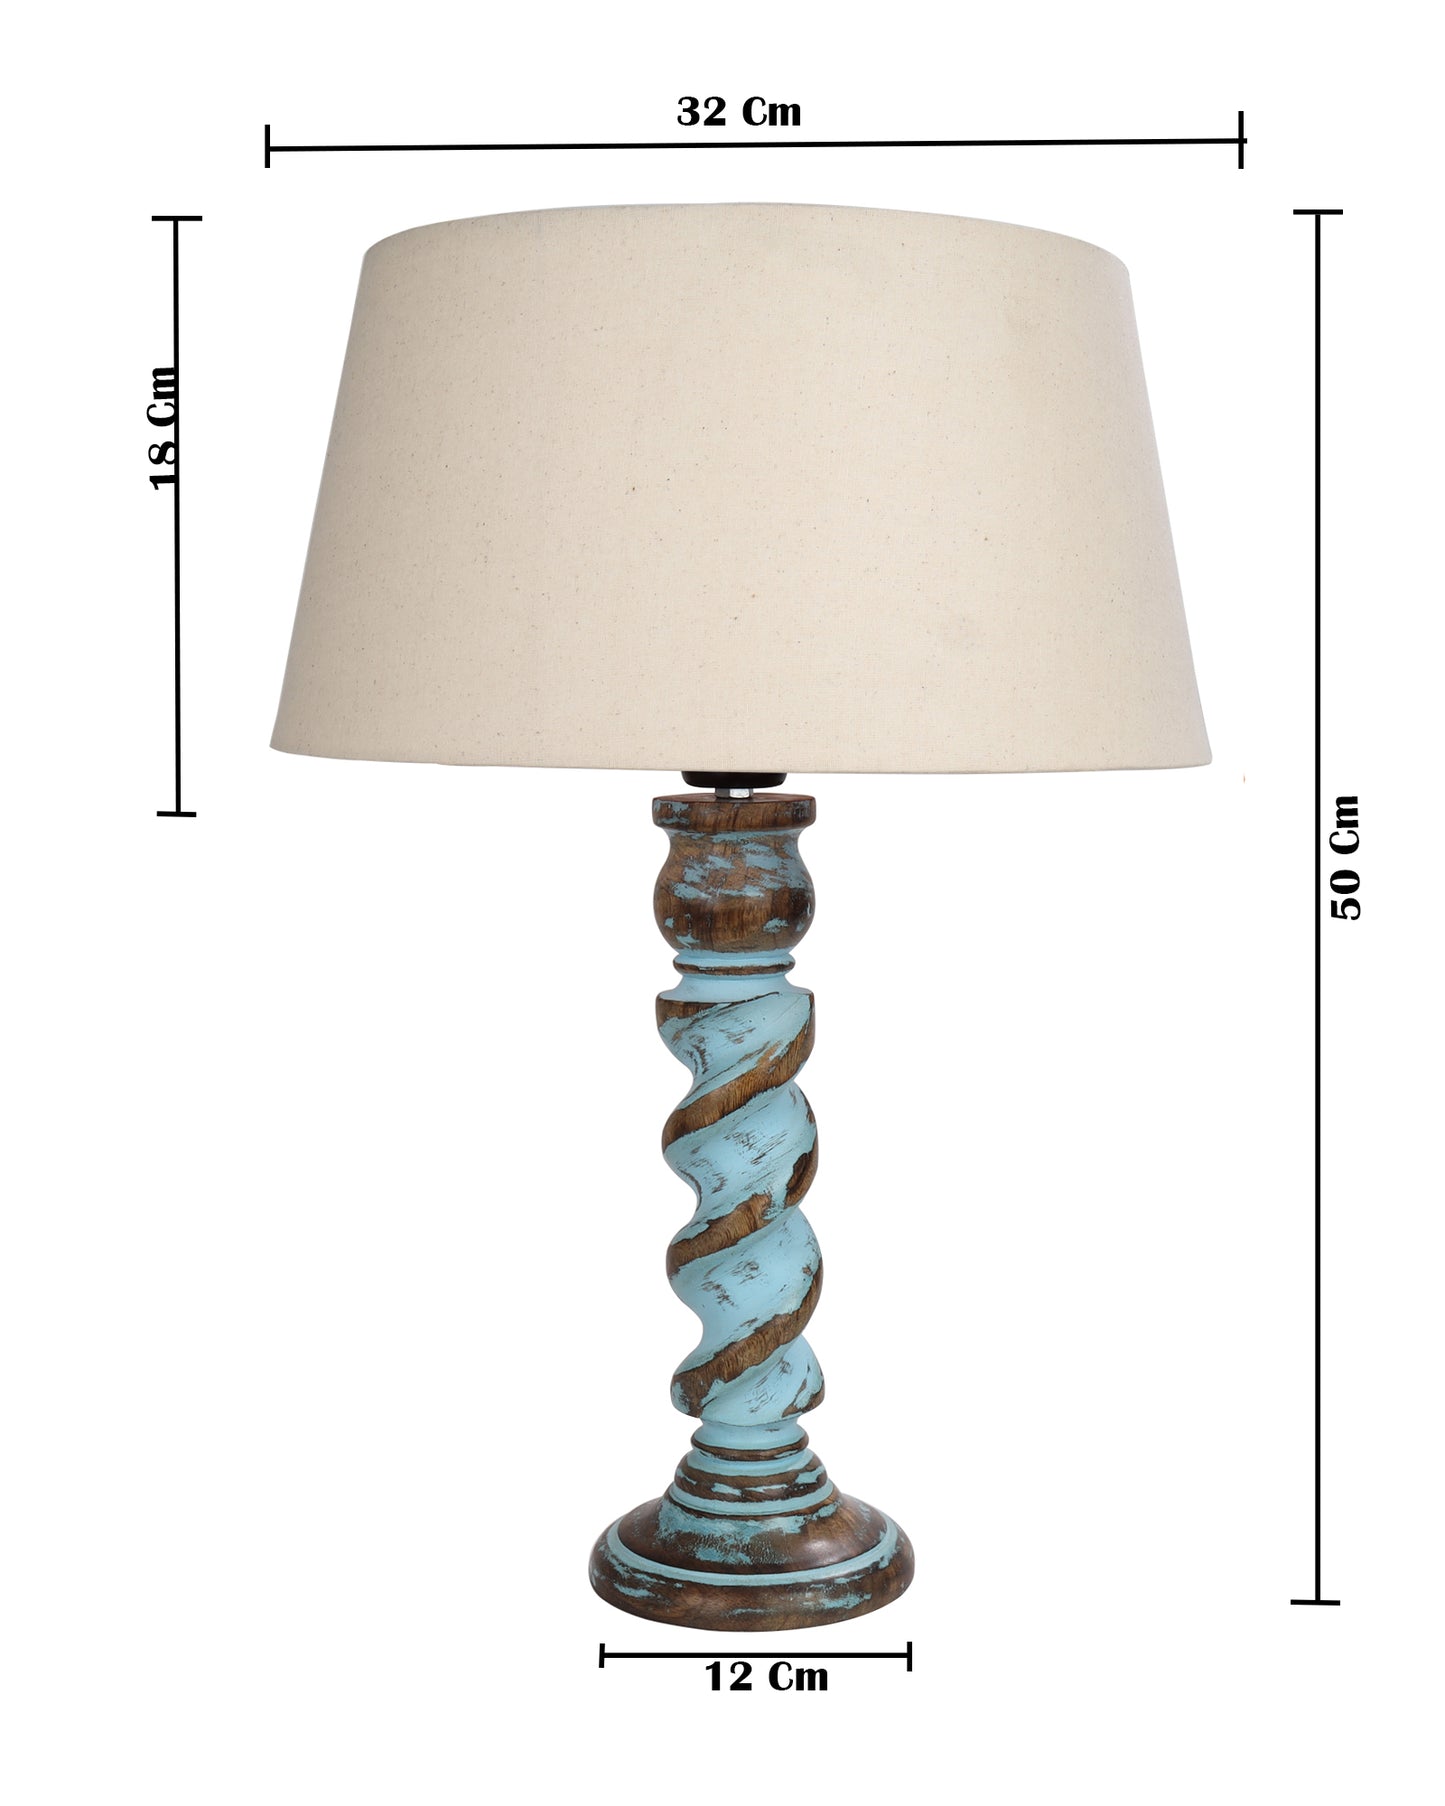 Signature Rustic Rope Distress Blue Table Lamp With Jute Drum Shade, farmhouse Living Room Bedroom House Bedside Nightstand Home Office Reading Light